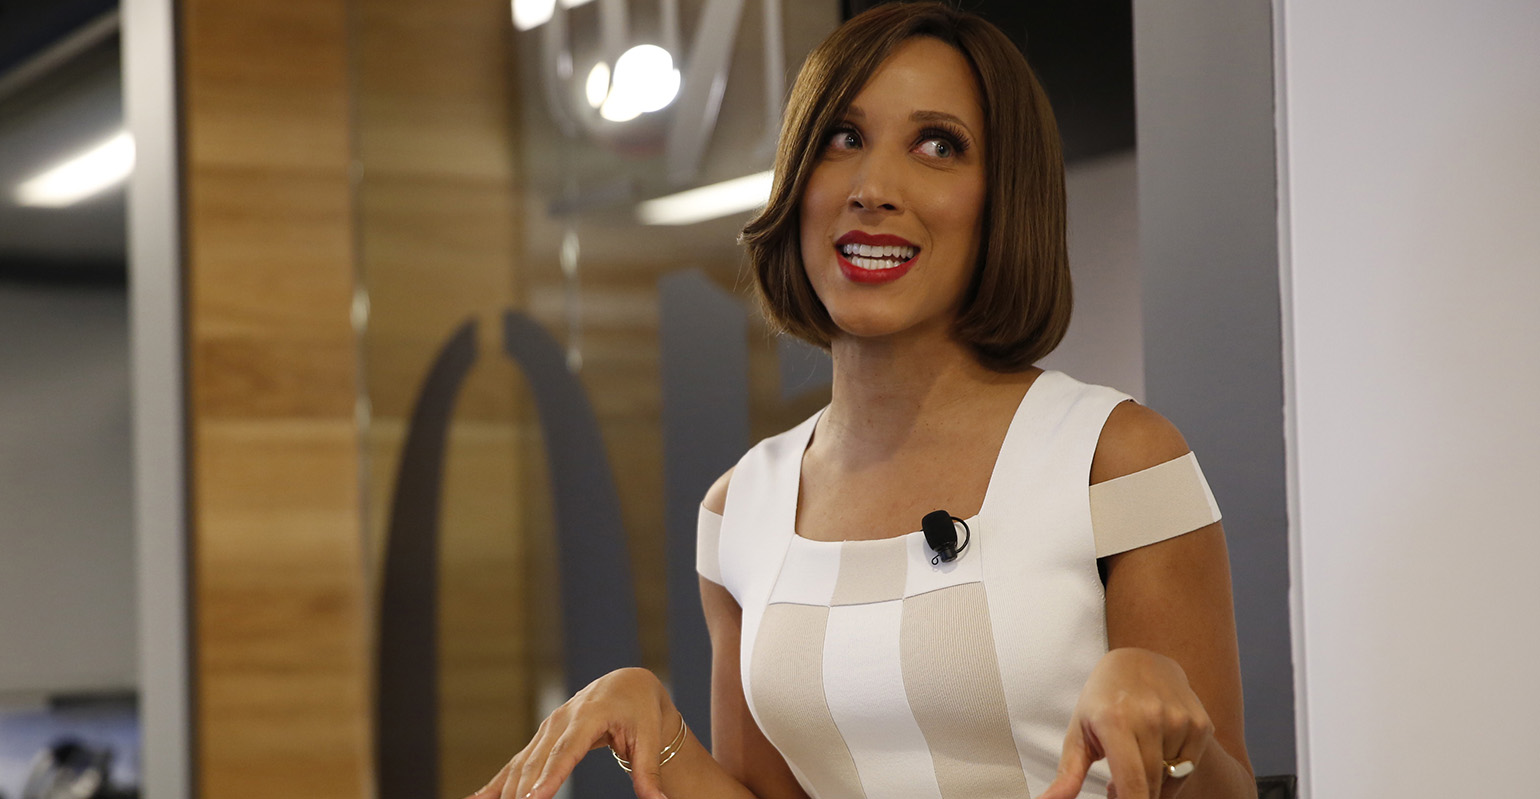 Robin Thede is Developing a TV Show About Financial Advisors | Wealth